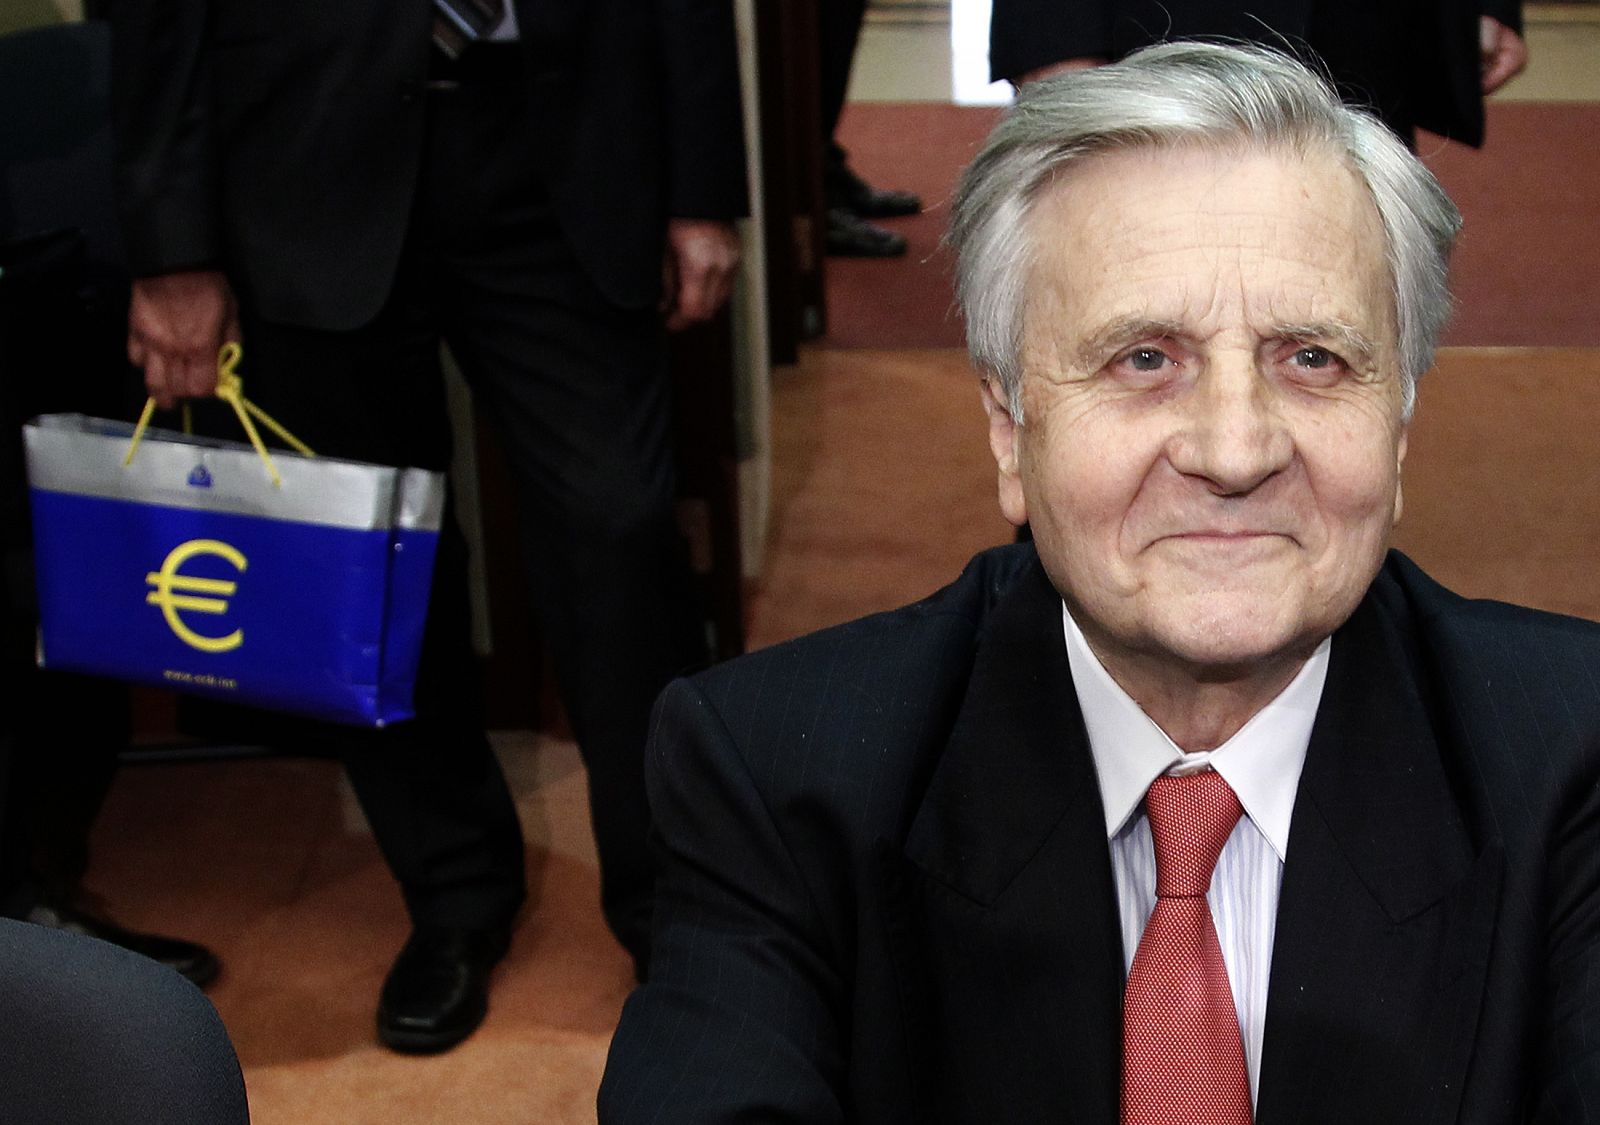 ECB President Trichet looks on at the start of an eurozone finance ministers meeting in Brussels